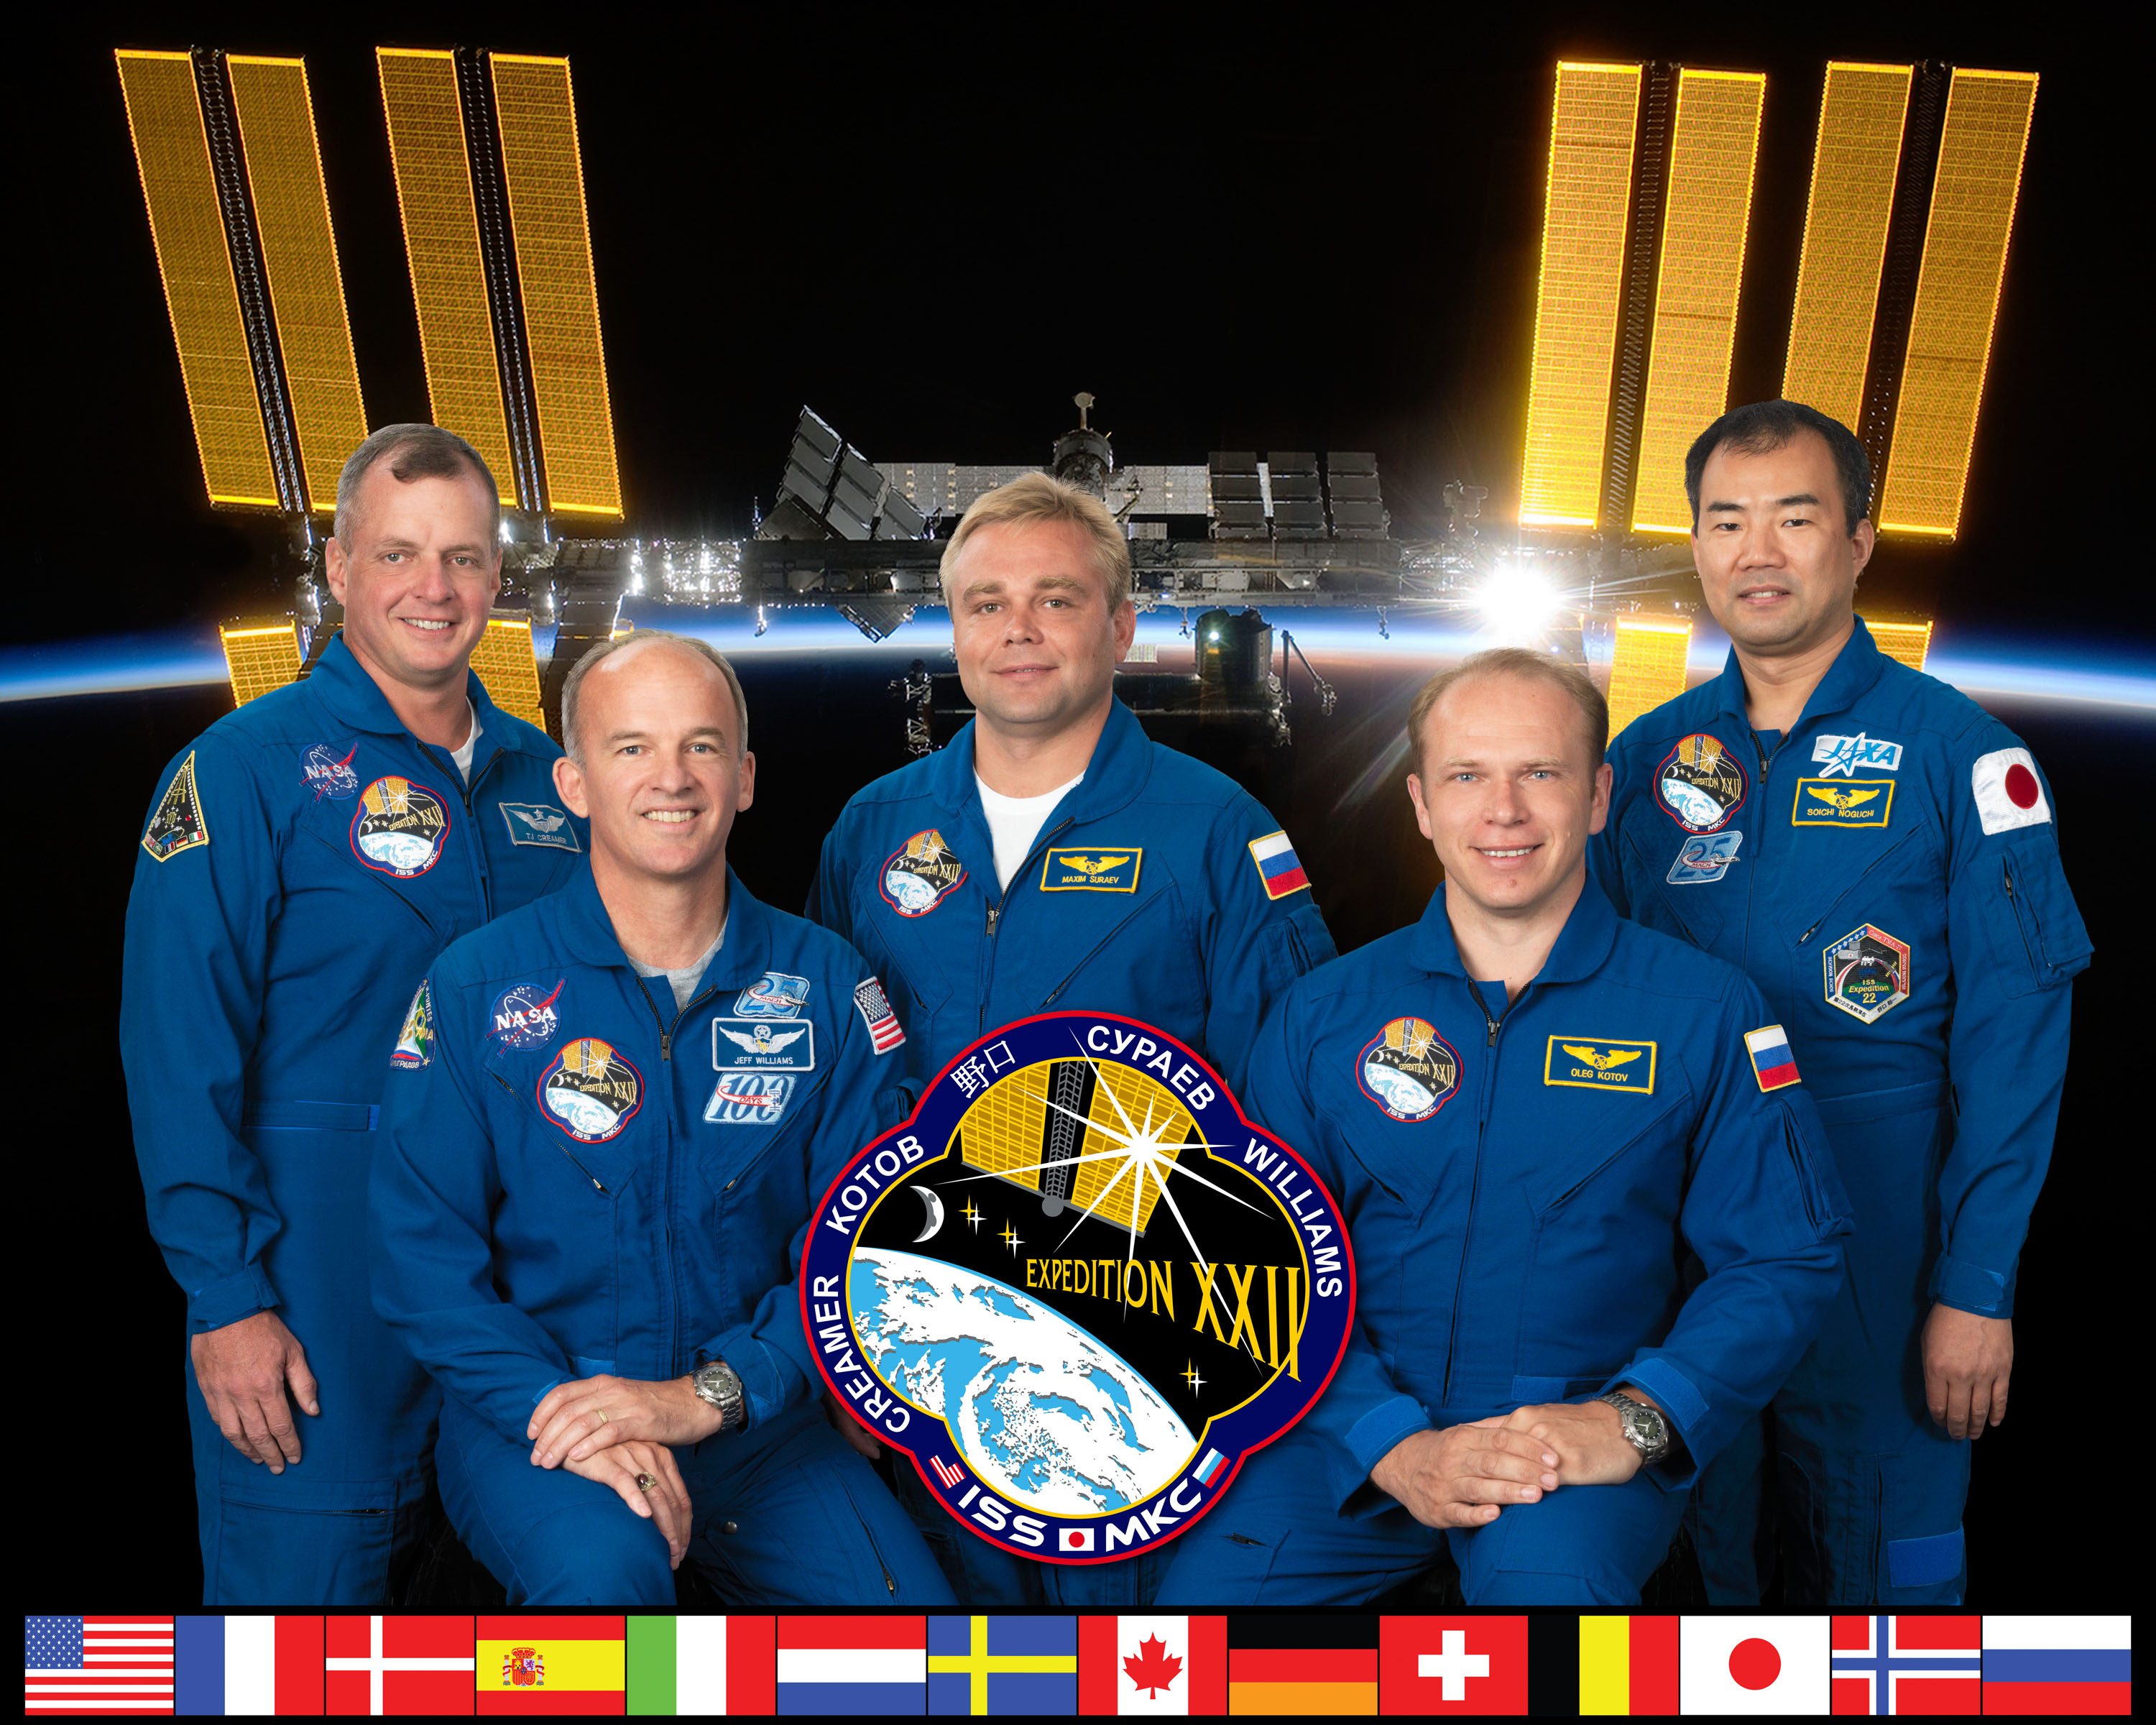 Expedition 22 Official Crew Portrait